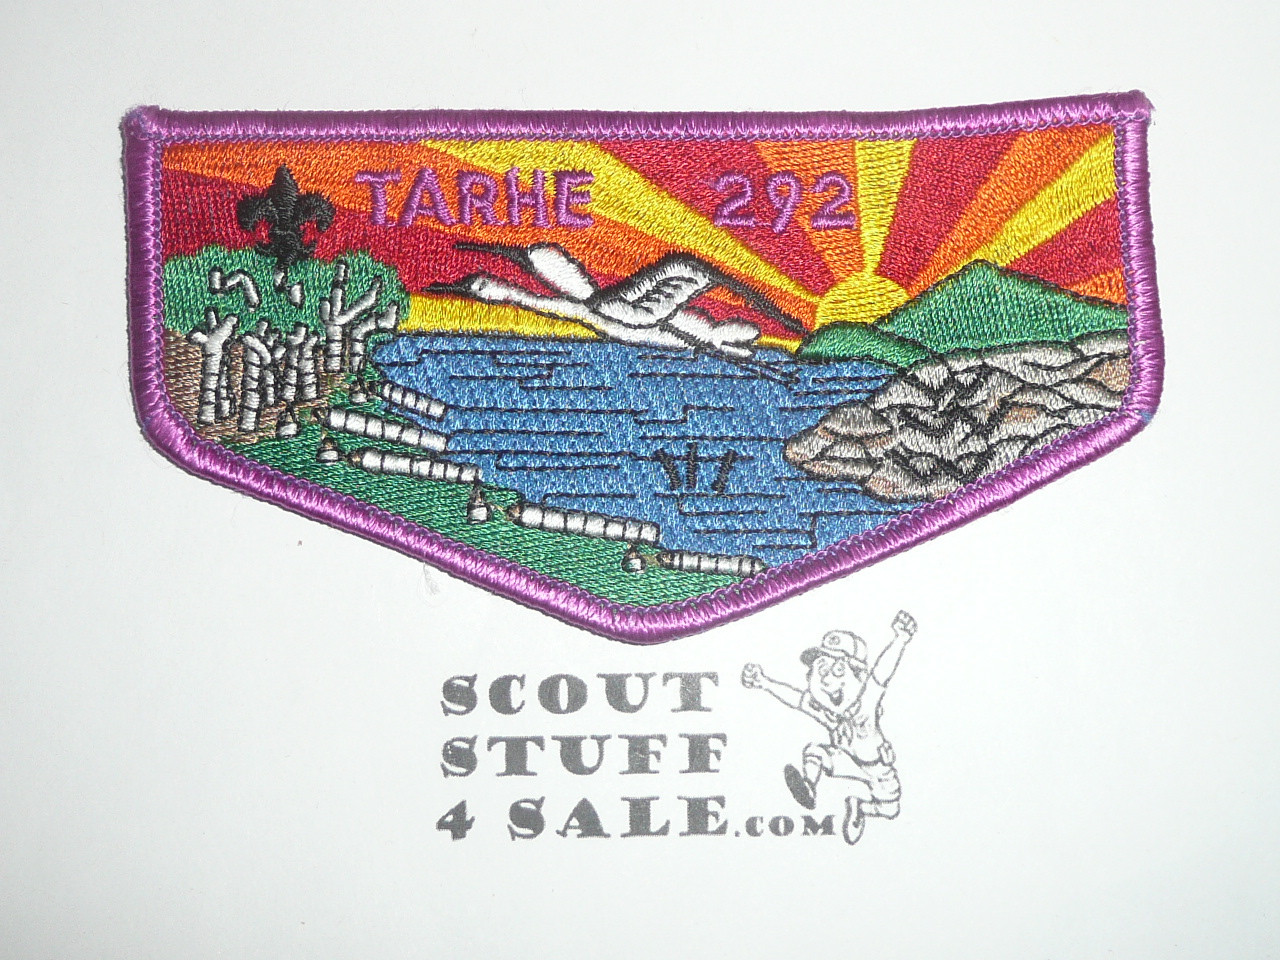 Order of the Arrow Lodge #292 Tarhe s19 Flap Patch